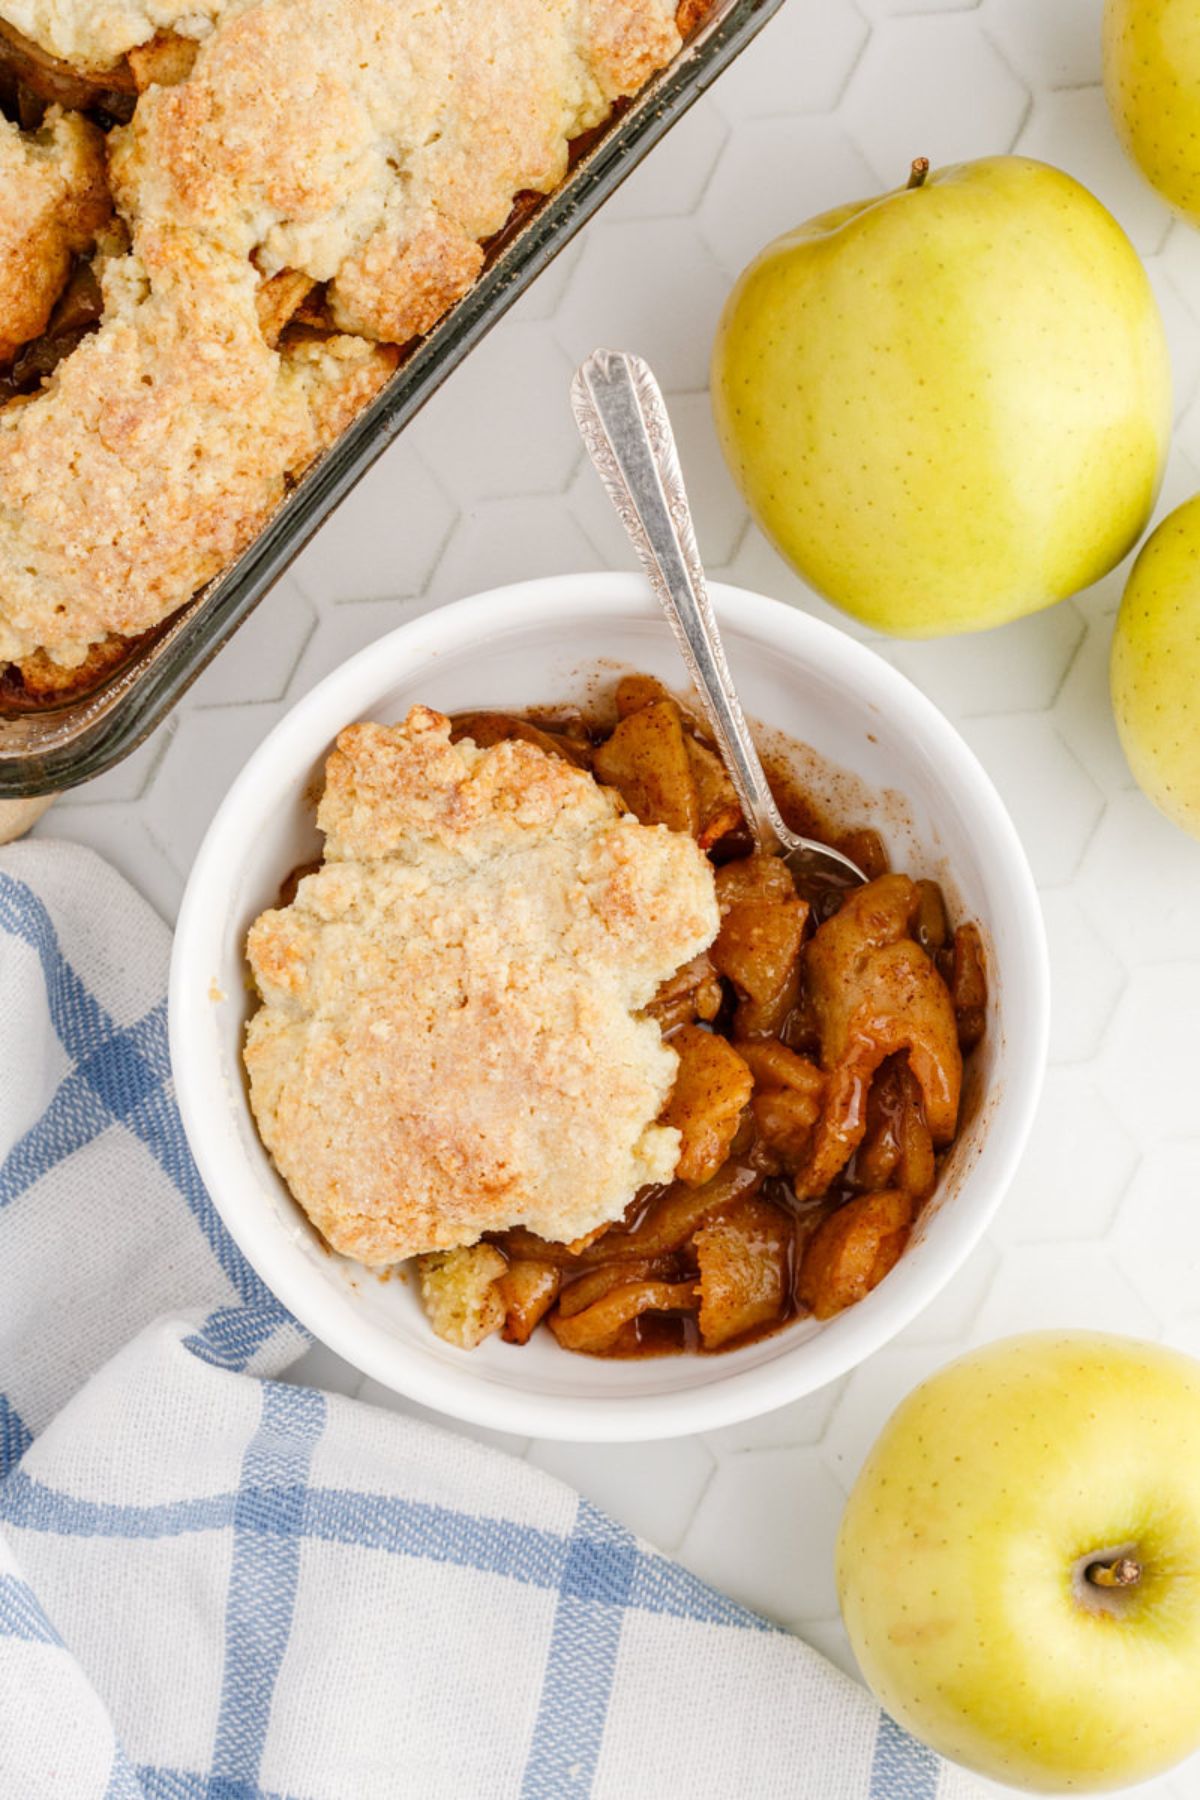 Looking down on a bowl of Apple Cobbler.